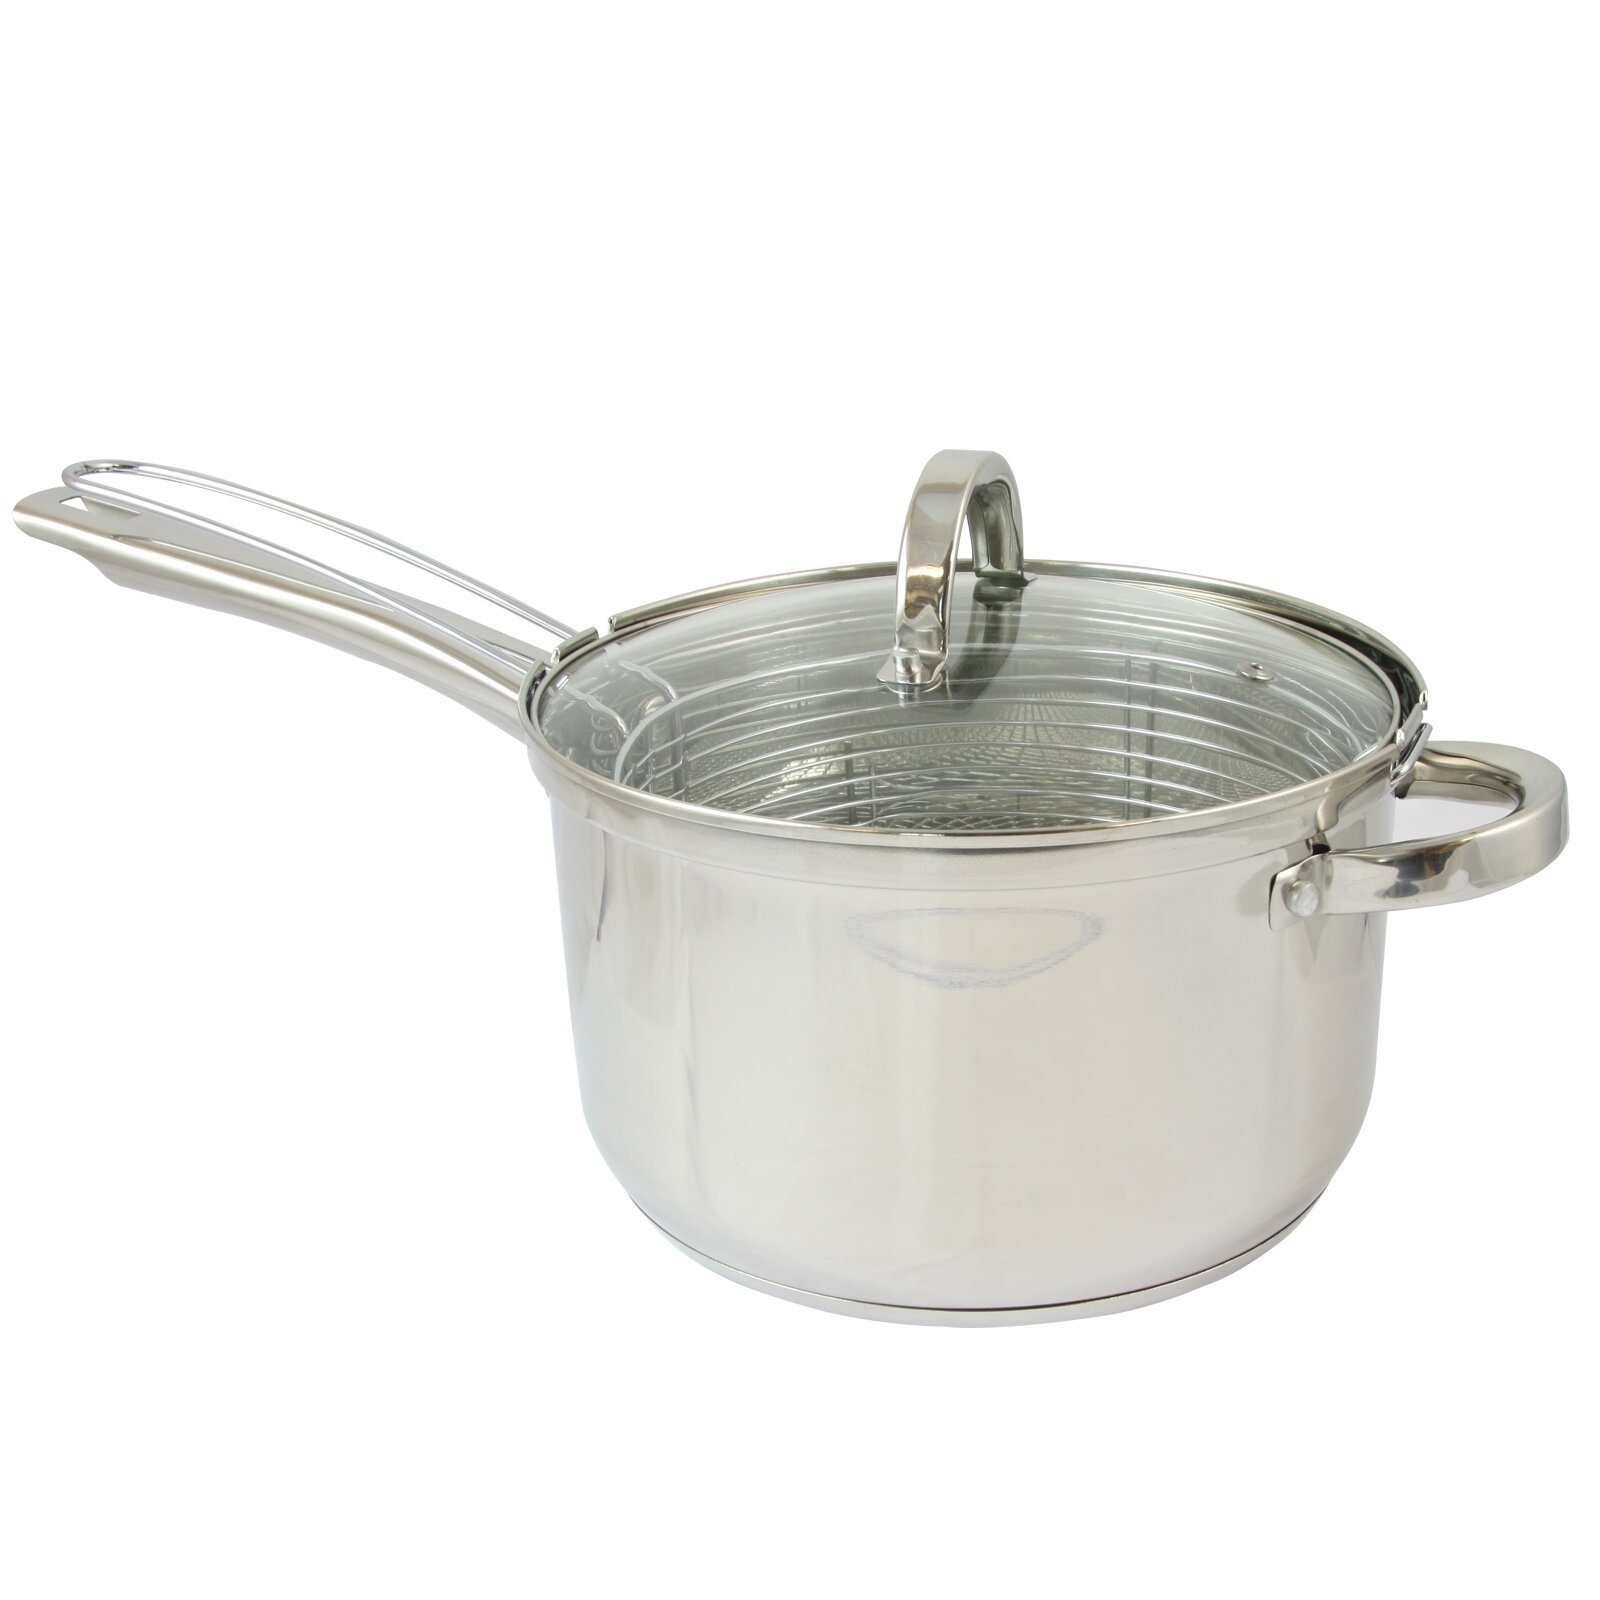 QUALITY STAINLESS STEEL INDUCTION DEEP CHIP PAN FRYER POT WITH LID & BASKET 